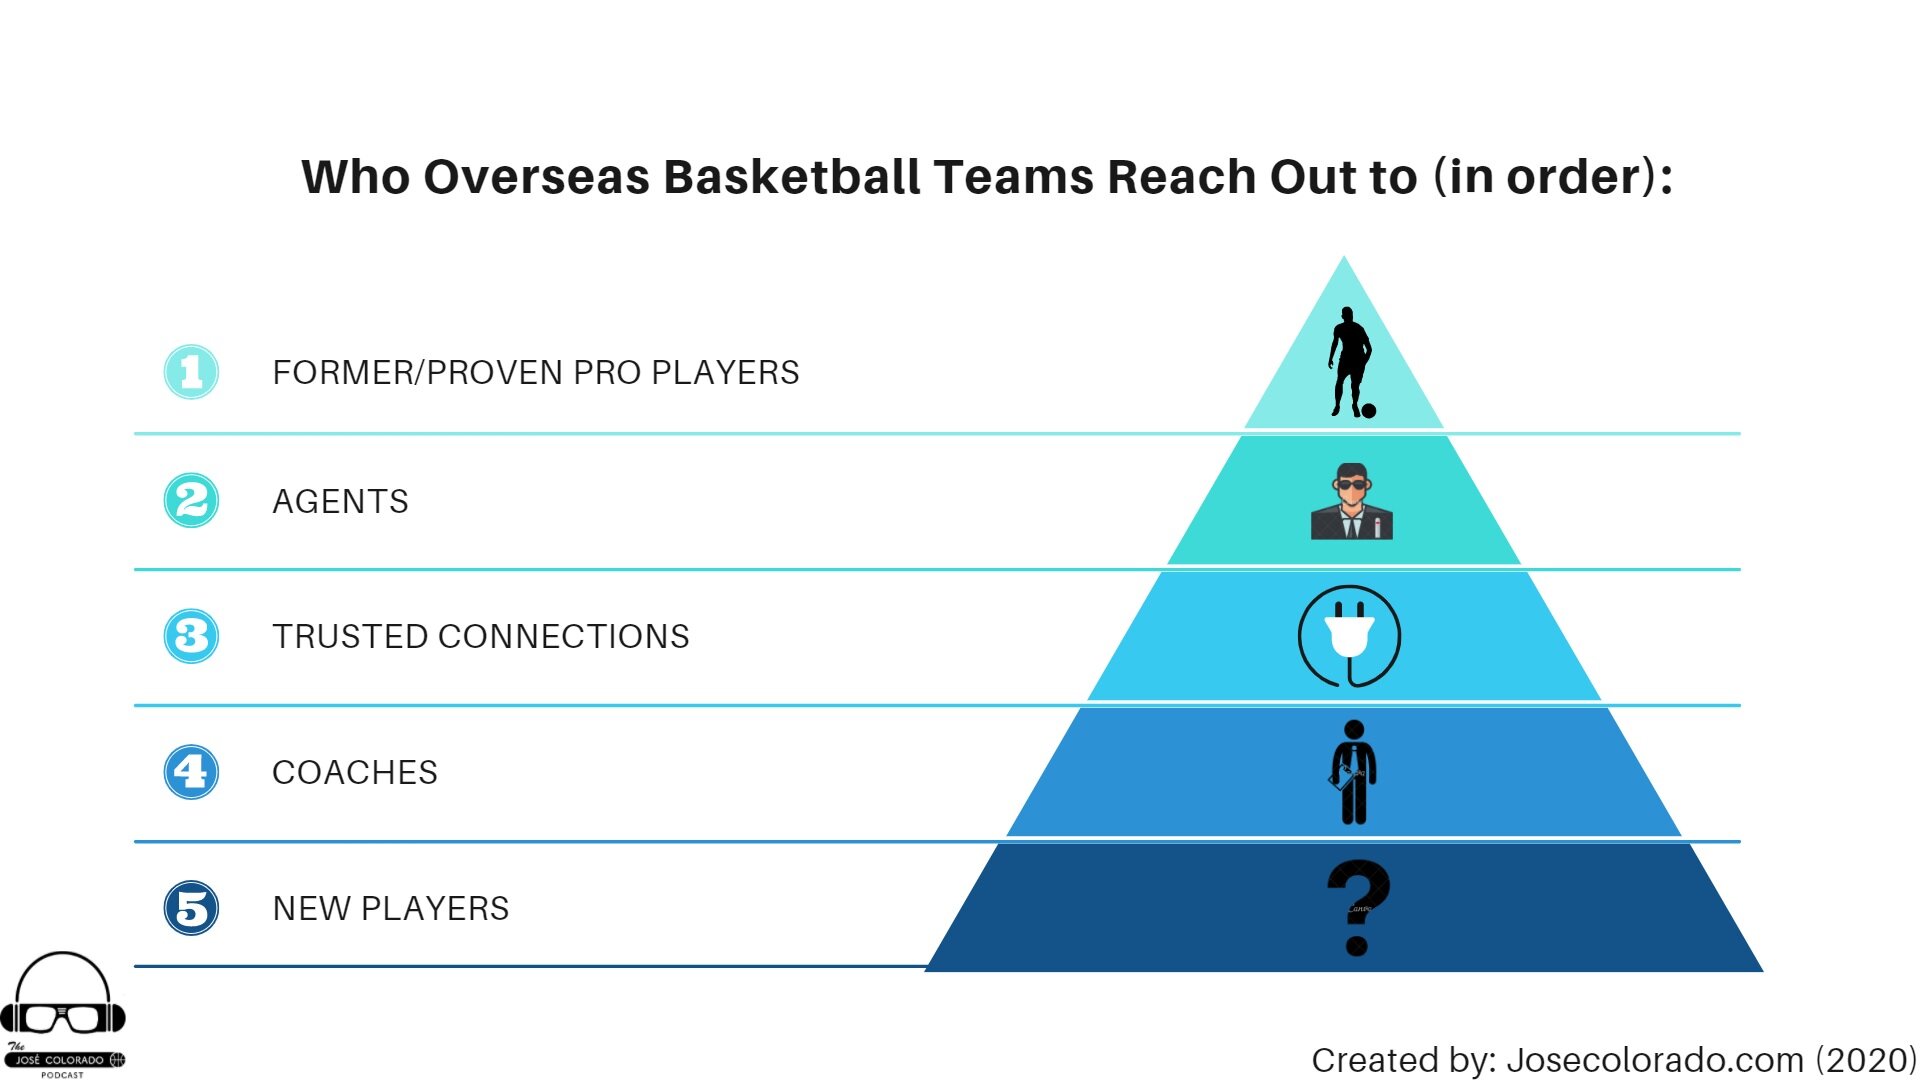 Basketball players should know that overseas basketball teams contact those they are most familiar with first.